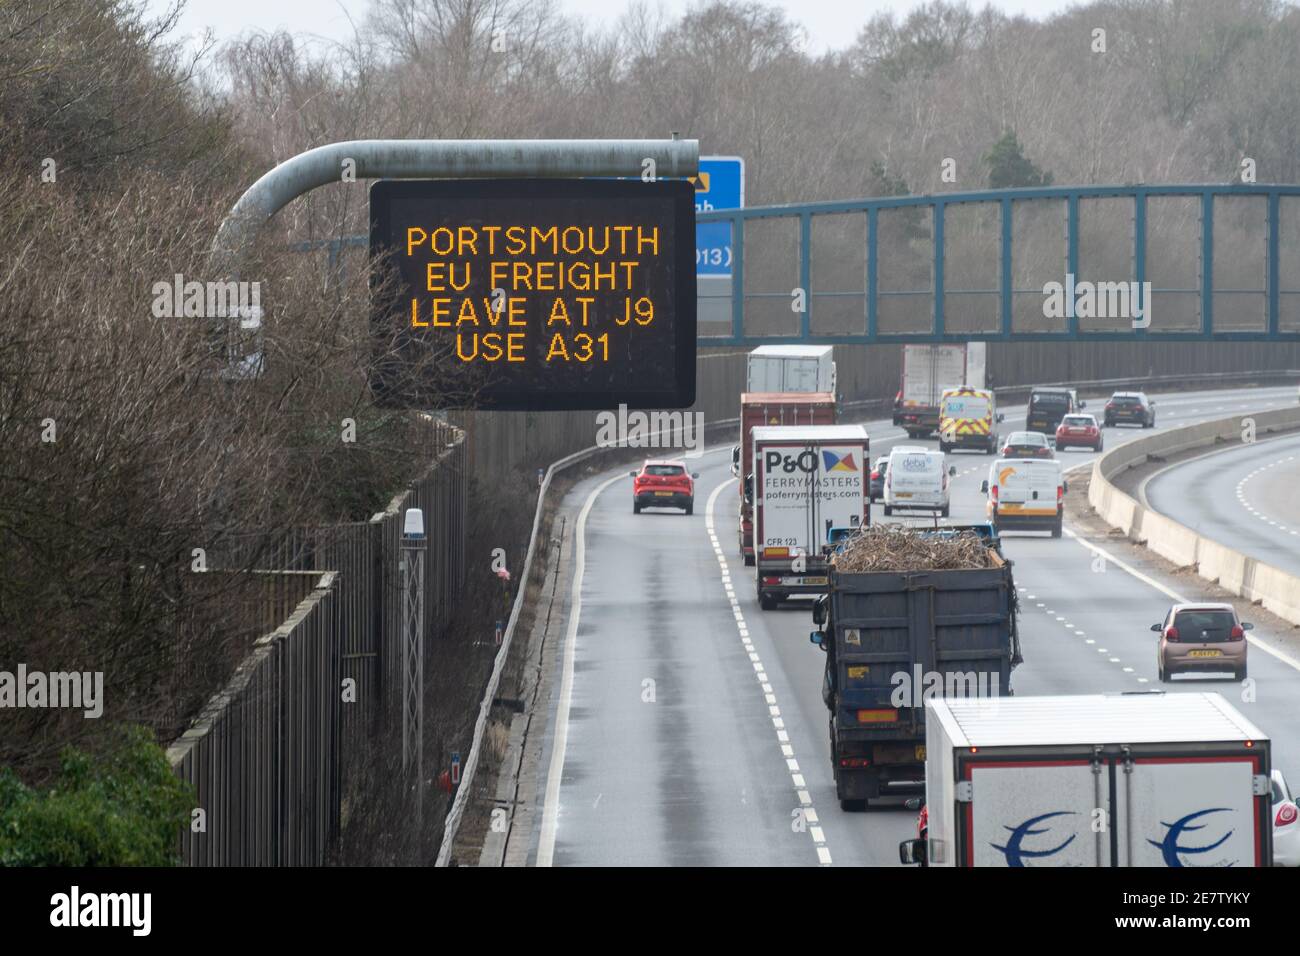 M3 Motorway sign, Portsmouth EU freight leave at J9 use A31, directions for lorries trucks heading to Europe following Brexit, January 2021 England UK Stock Photo